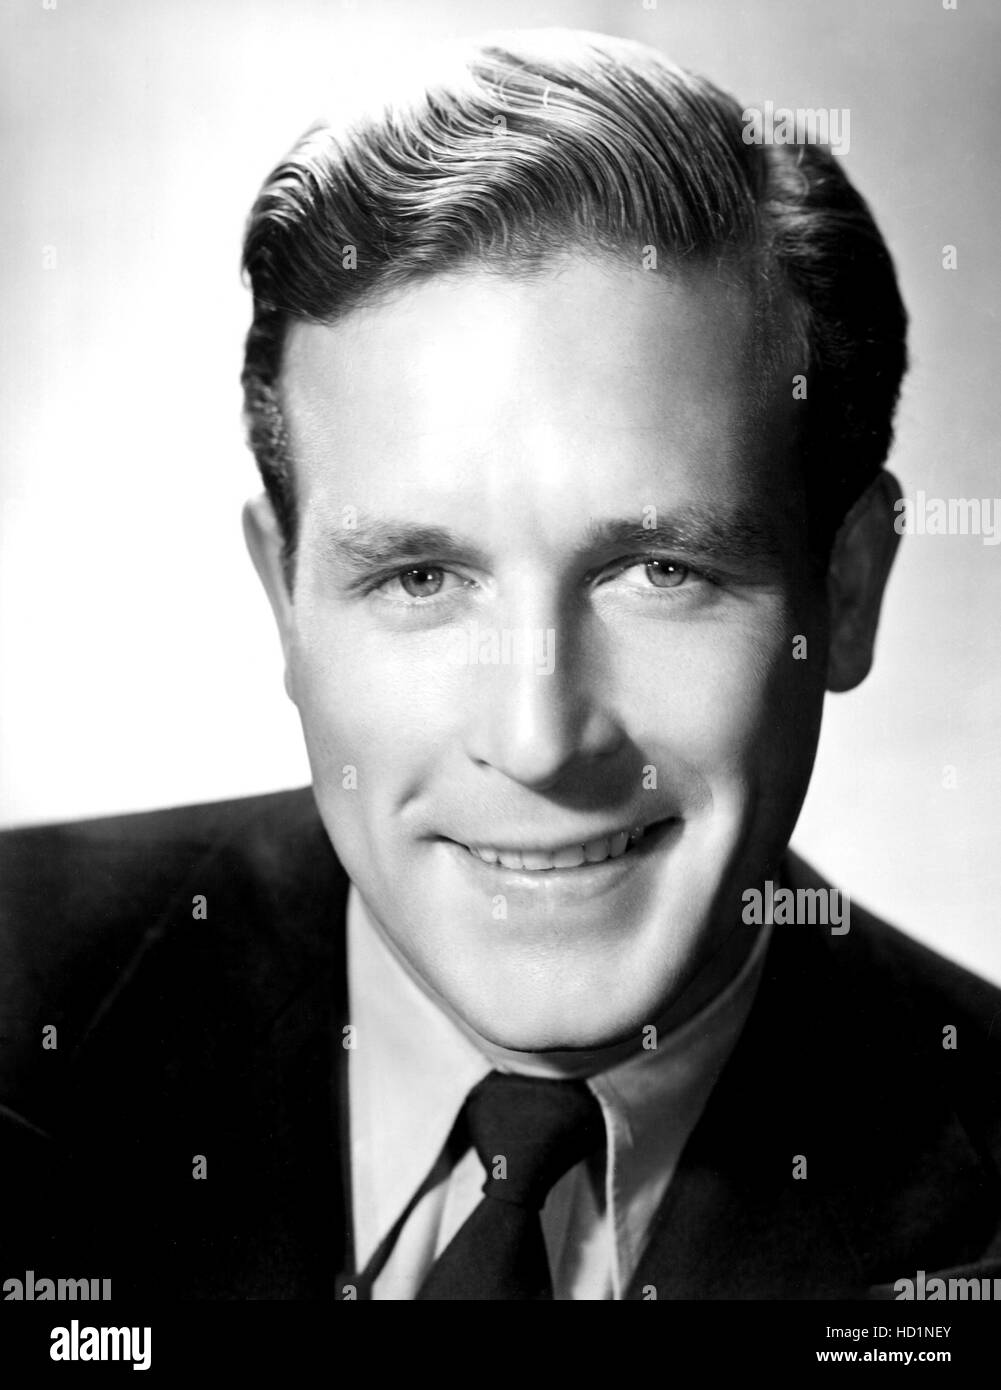 SAN QUENTIN, Lawrence Tierney, 1946 Stock Photo - Alamy